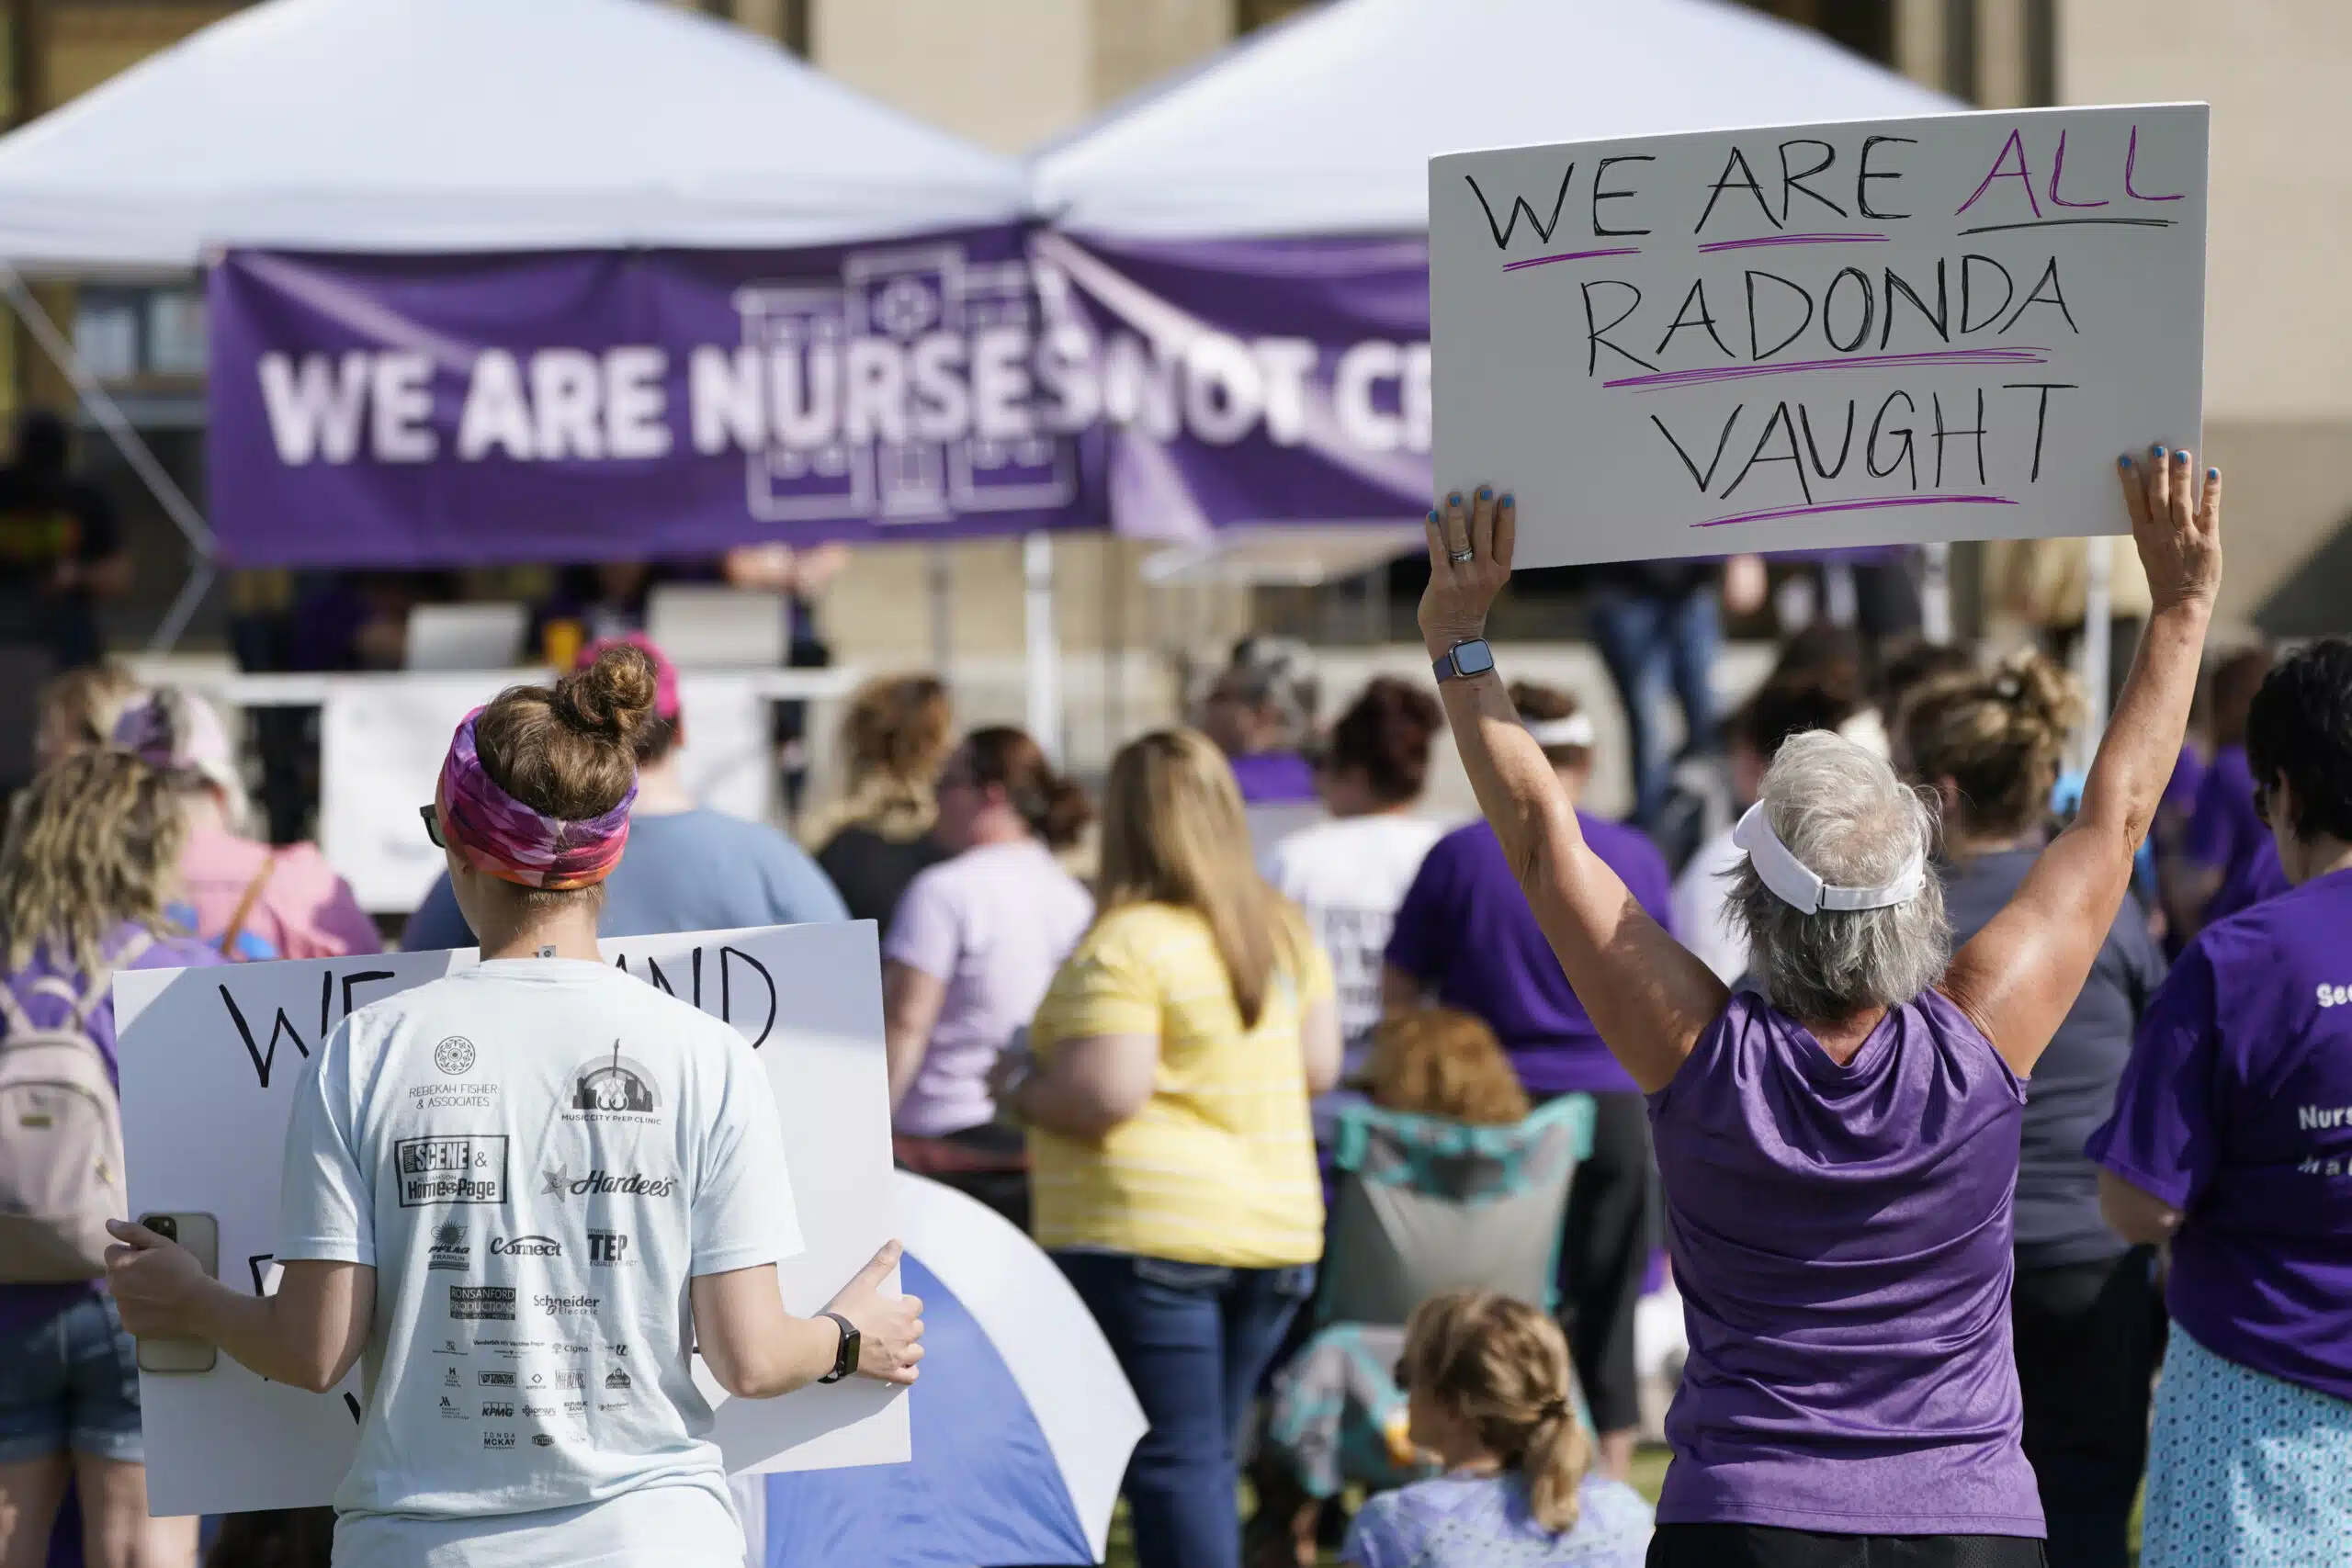 Demonstrators gather outside the courthouse where the sentencing hearing for former nurse RaDonda Vaught is being held Friday, May 13, 2022, in Nashville, Tenn. Vaught was found guilty of criminally negligent homicide in the death of a patient in March after she accidentally administered the wrong medication.